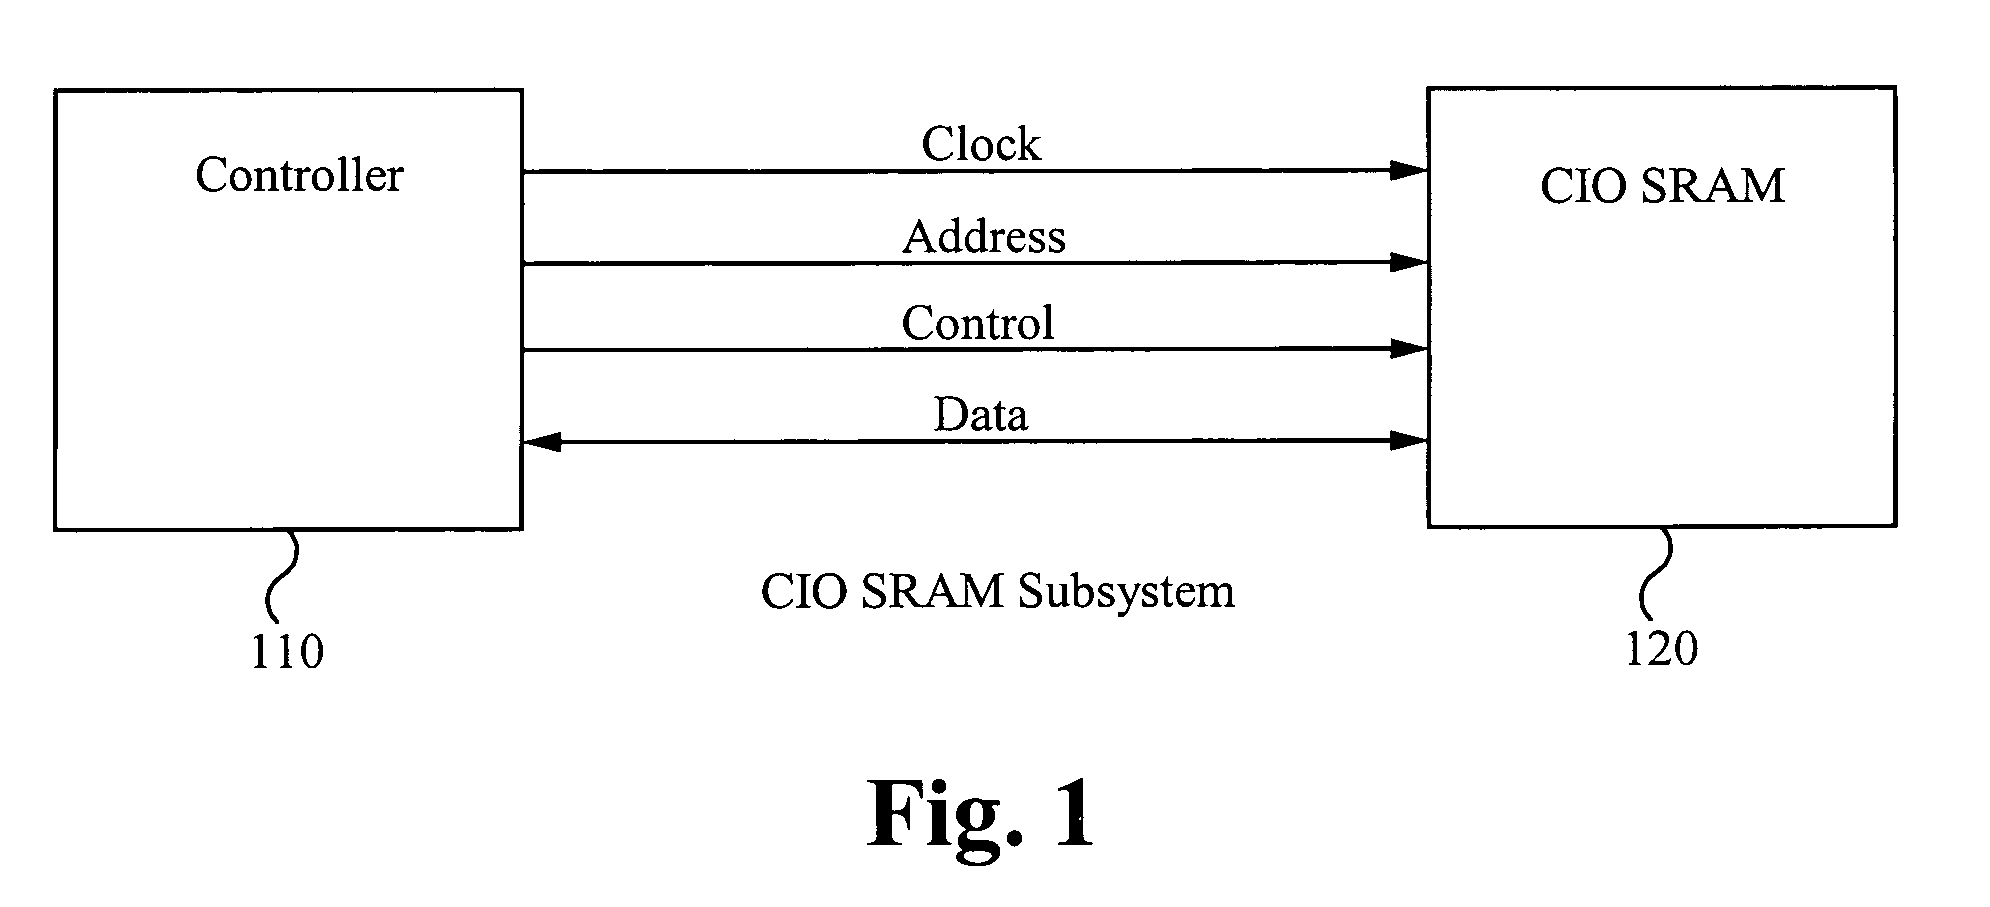 Efficient method for implementing programmable impedance output drivers and programmable input on die termination on a bi-directional data bus